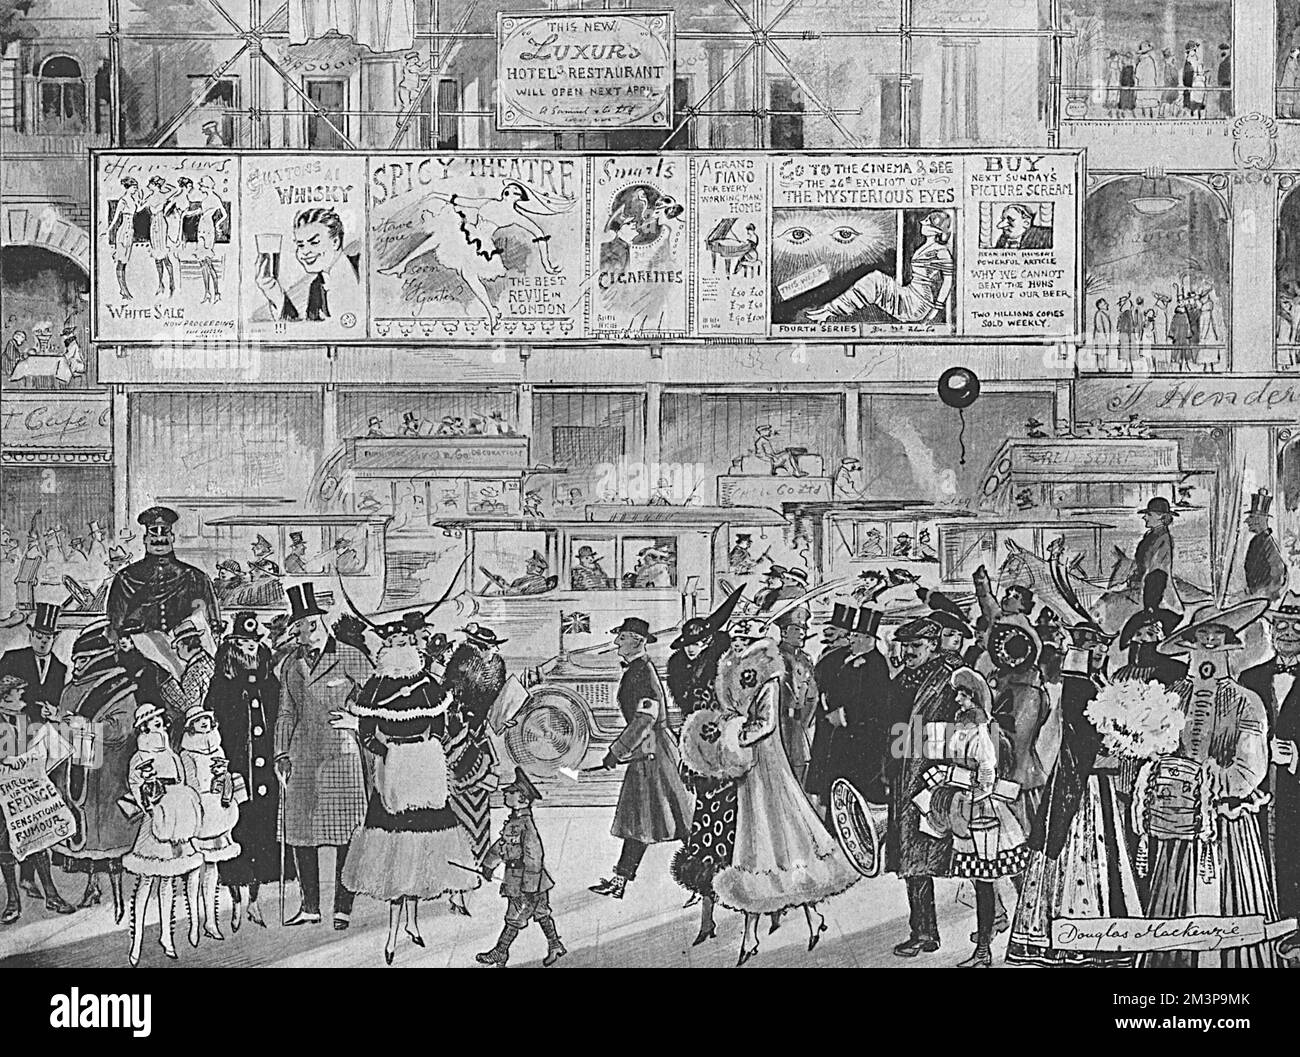 Illustration showing the mass of entertainment and amusements on offer to the London population during the First World War, despite the fact the country was supposed to be practising war economy.  Cars and taxis fill the streets, people are well dressed and posters advertise clothing sales, drink, film and theatre shows.       Date: 1916 Stock Photo